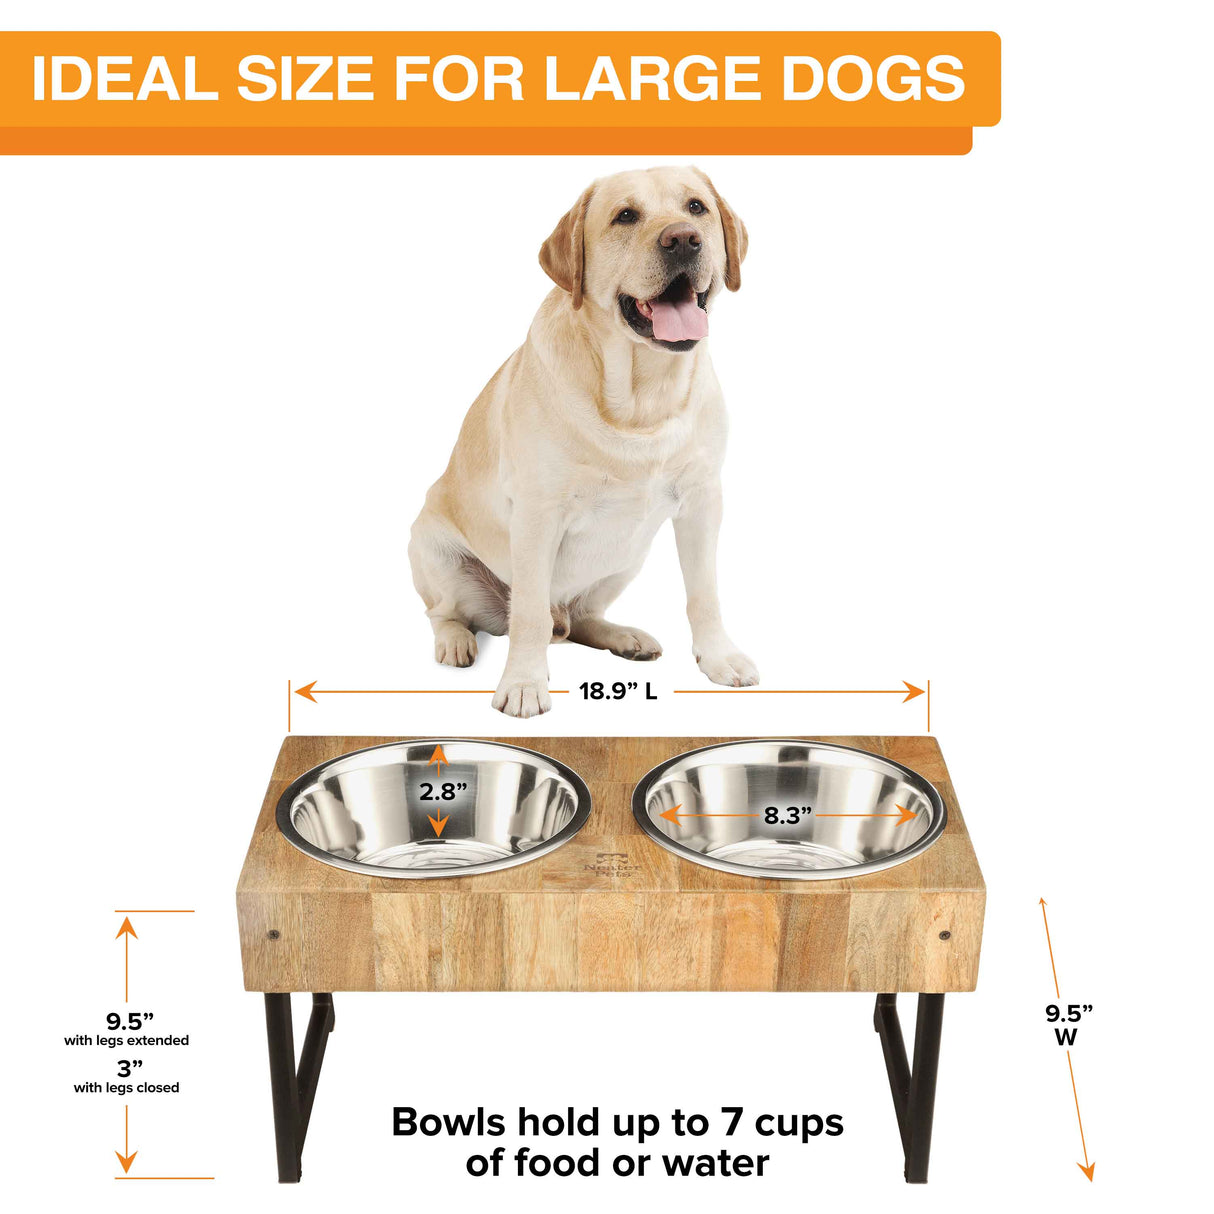 Large wooden feeder dimensions